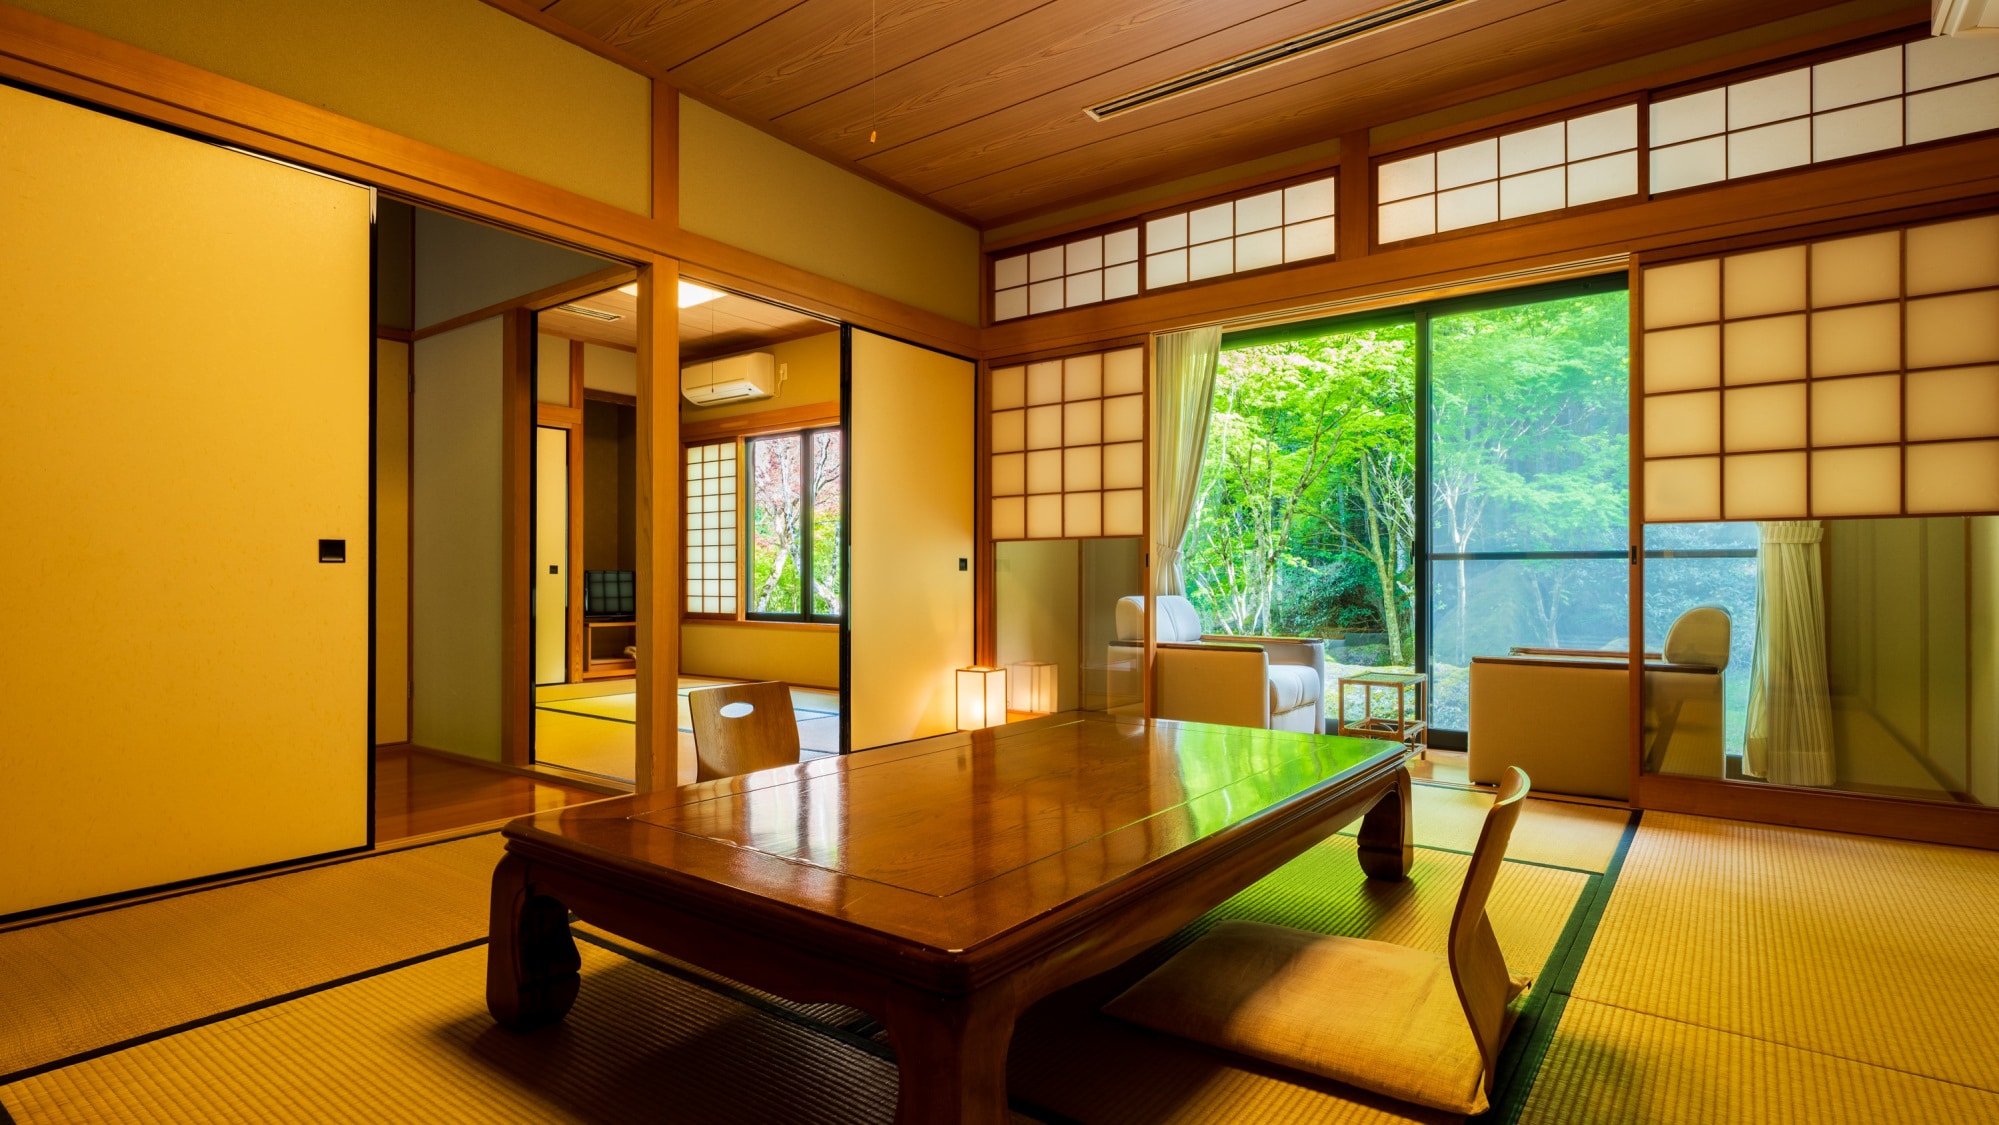 ◆ [Two Japanese-style rooms | Capacity 4 people] A detached room with a private garden overlooking the Yabakei Gorge